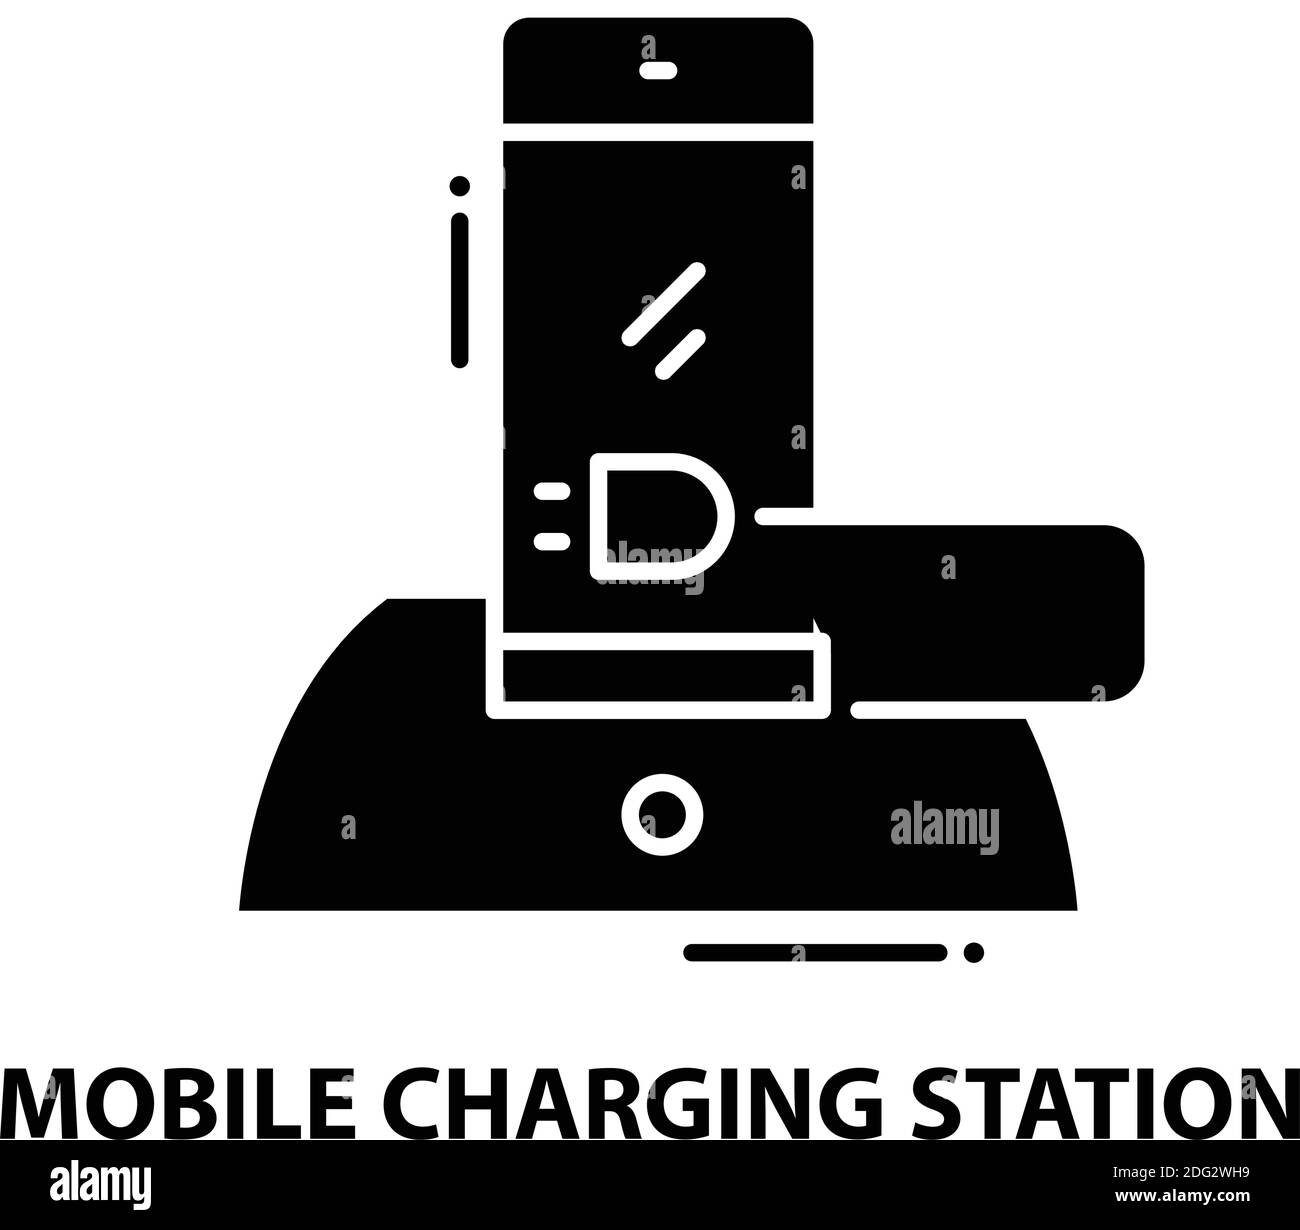 mobile charging station icon, black vector sign with editable strokes, concept illustration Stock Vector